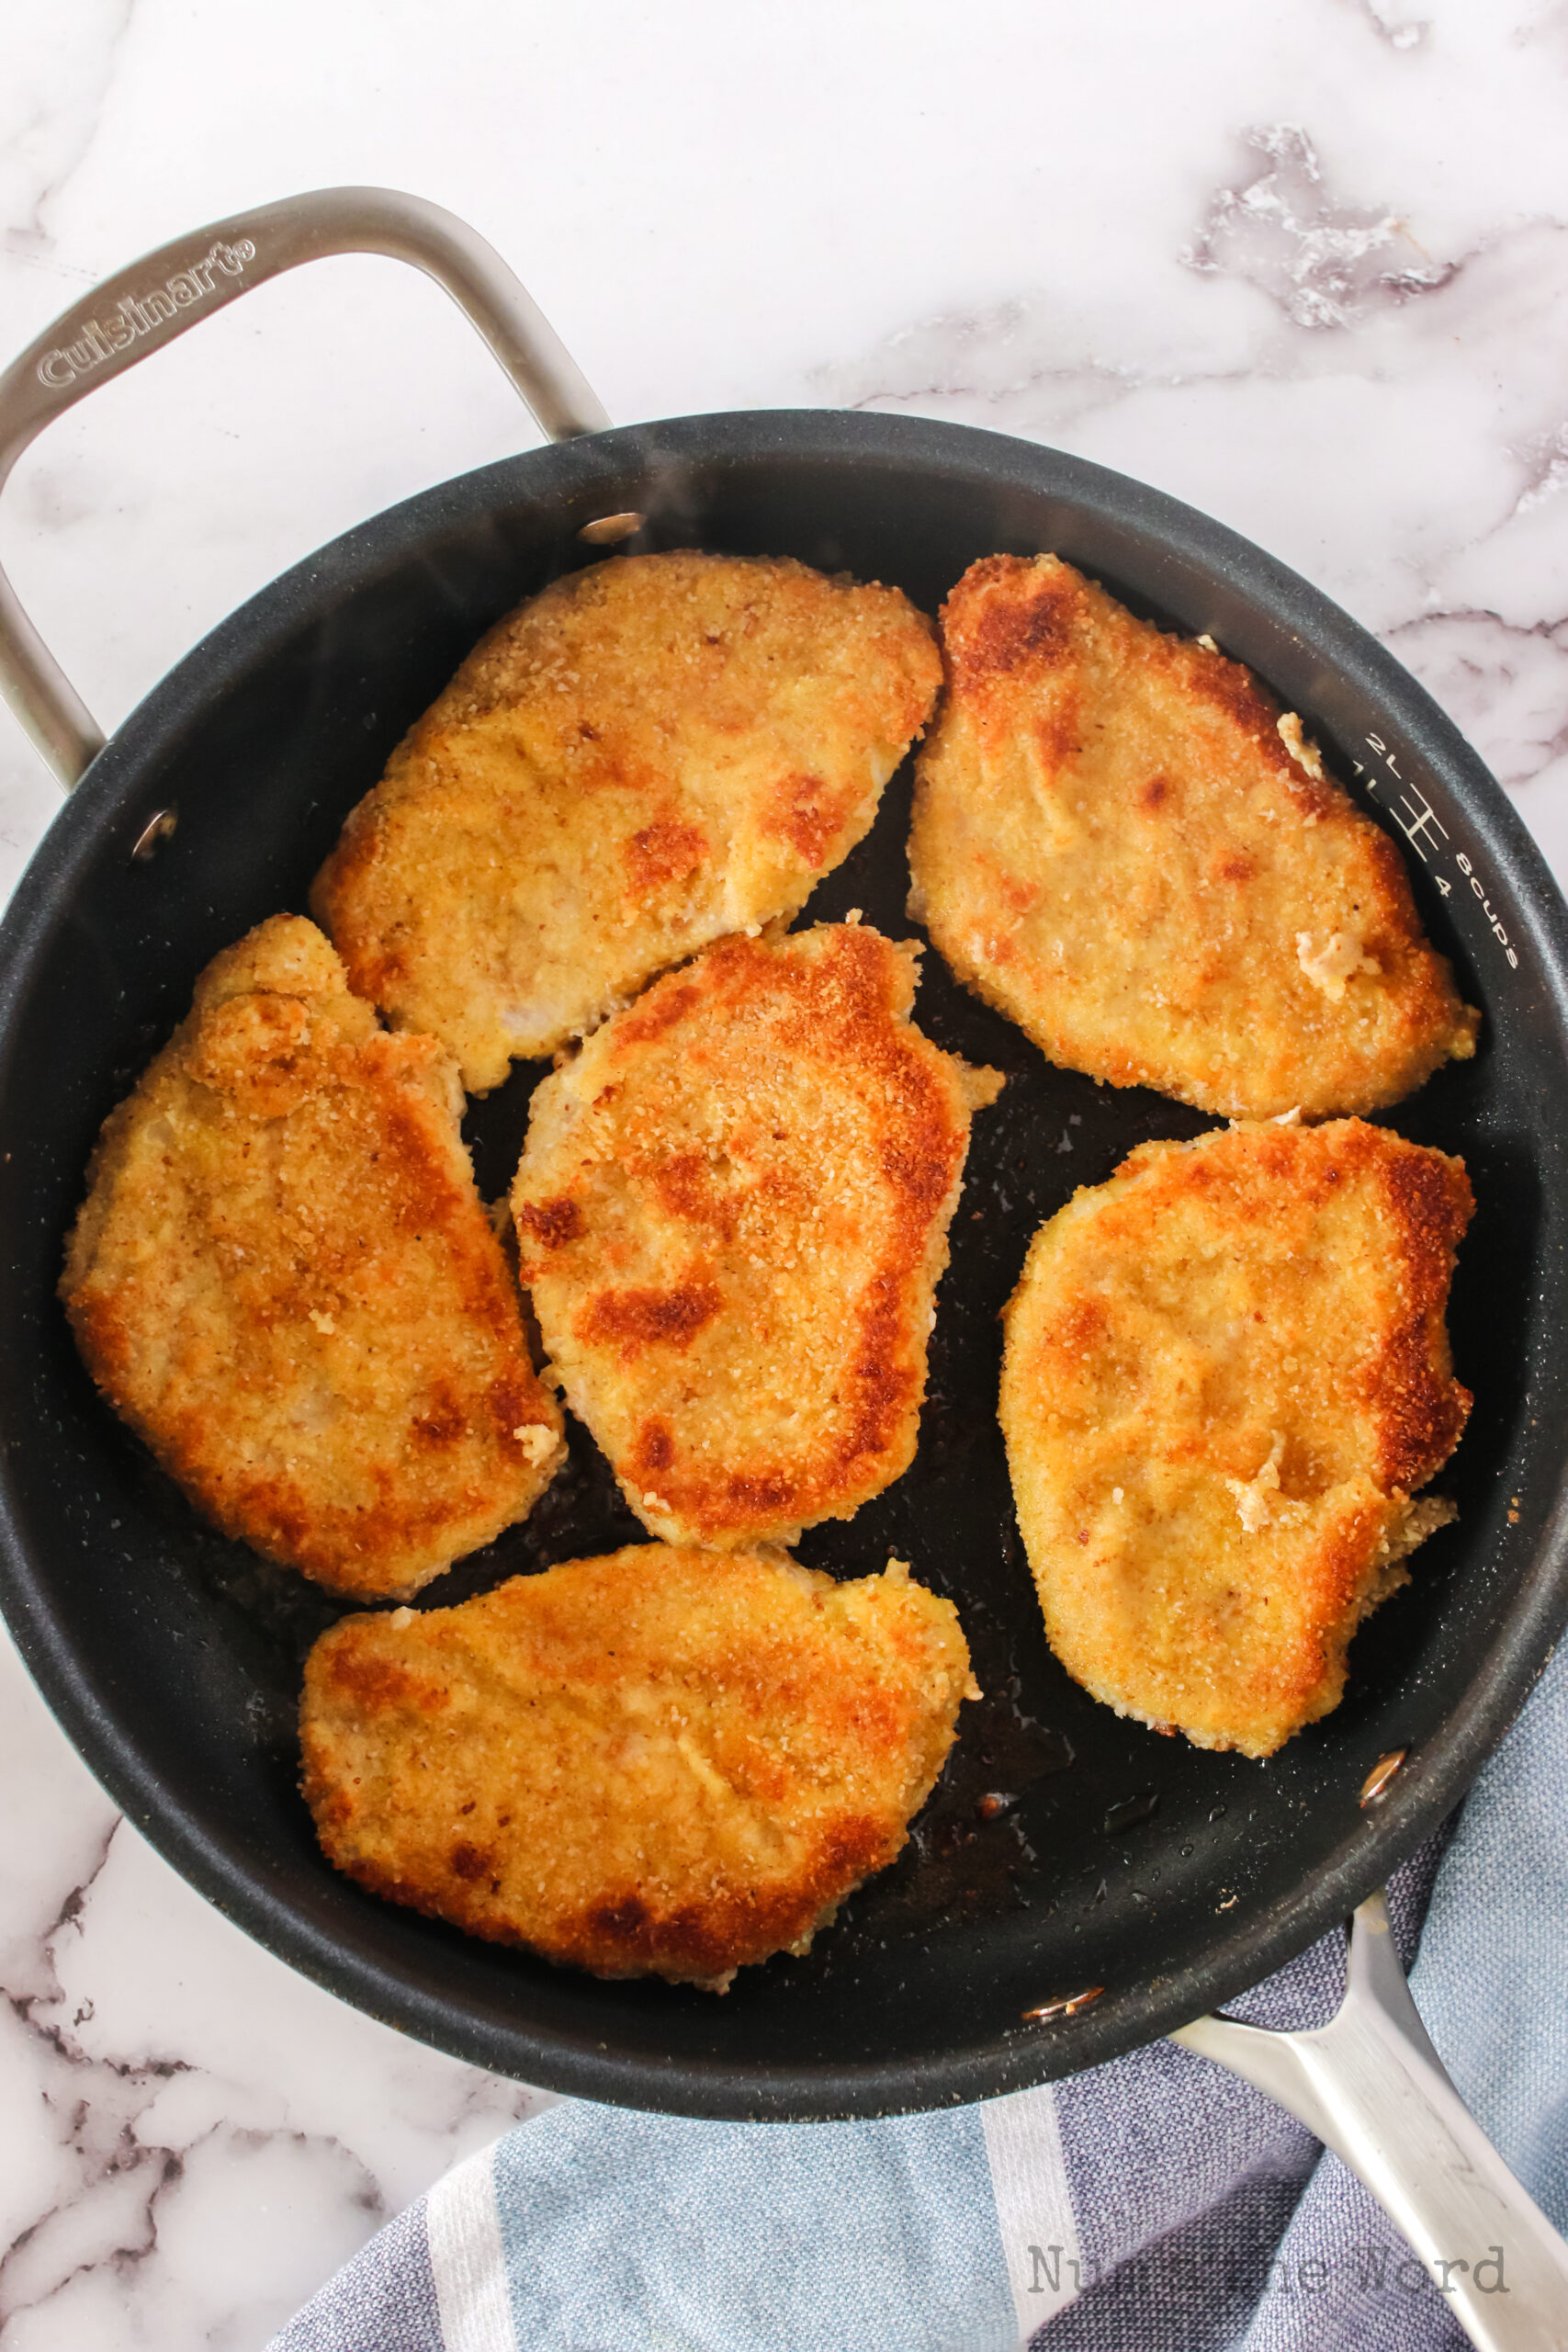 pork chops in skillet ready to fry